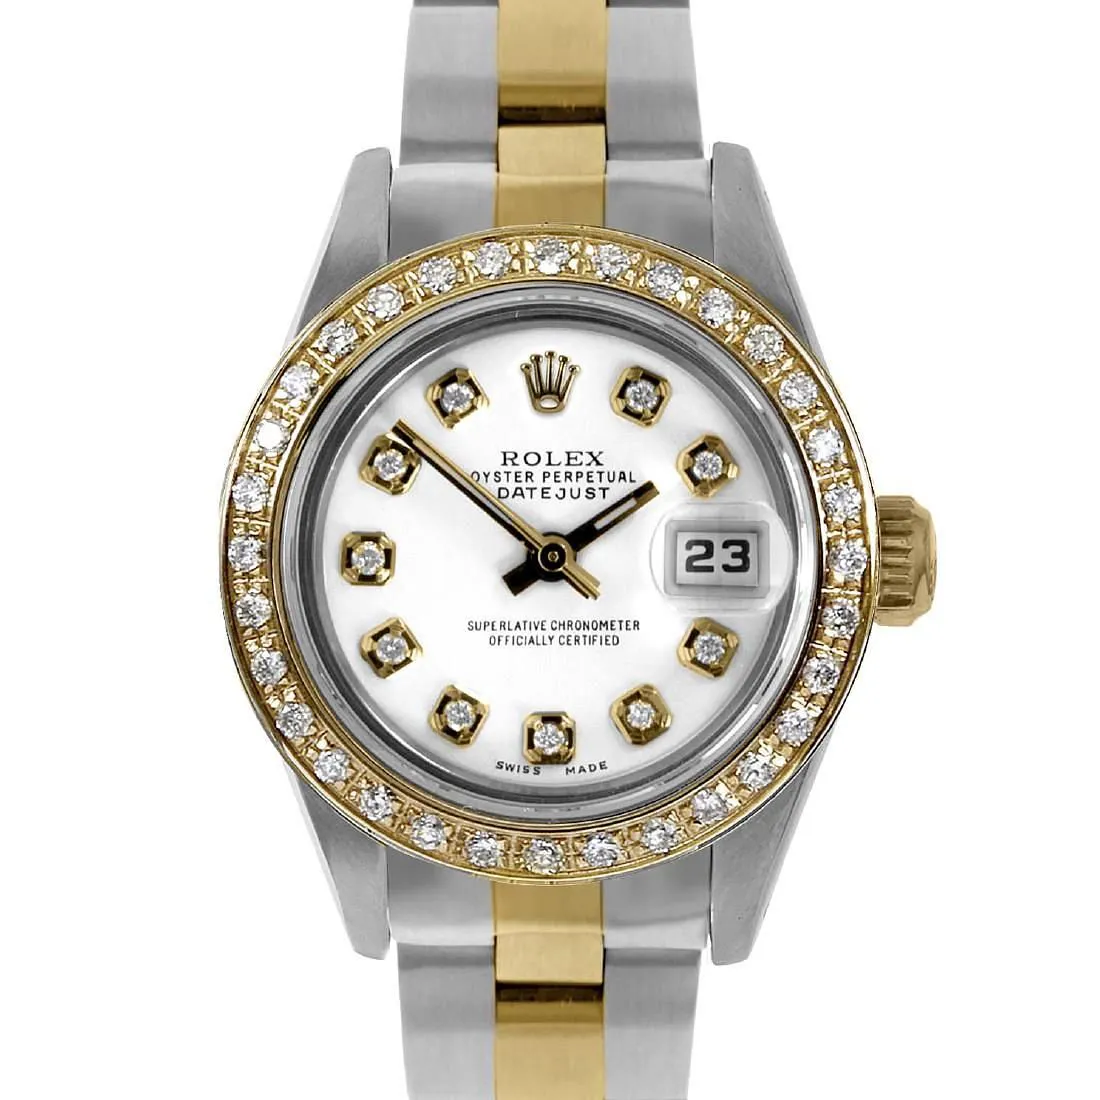 Rolex Datejust 26 69163 26mm Yellow gold, stainless steel and diamond-set White